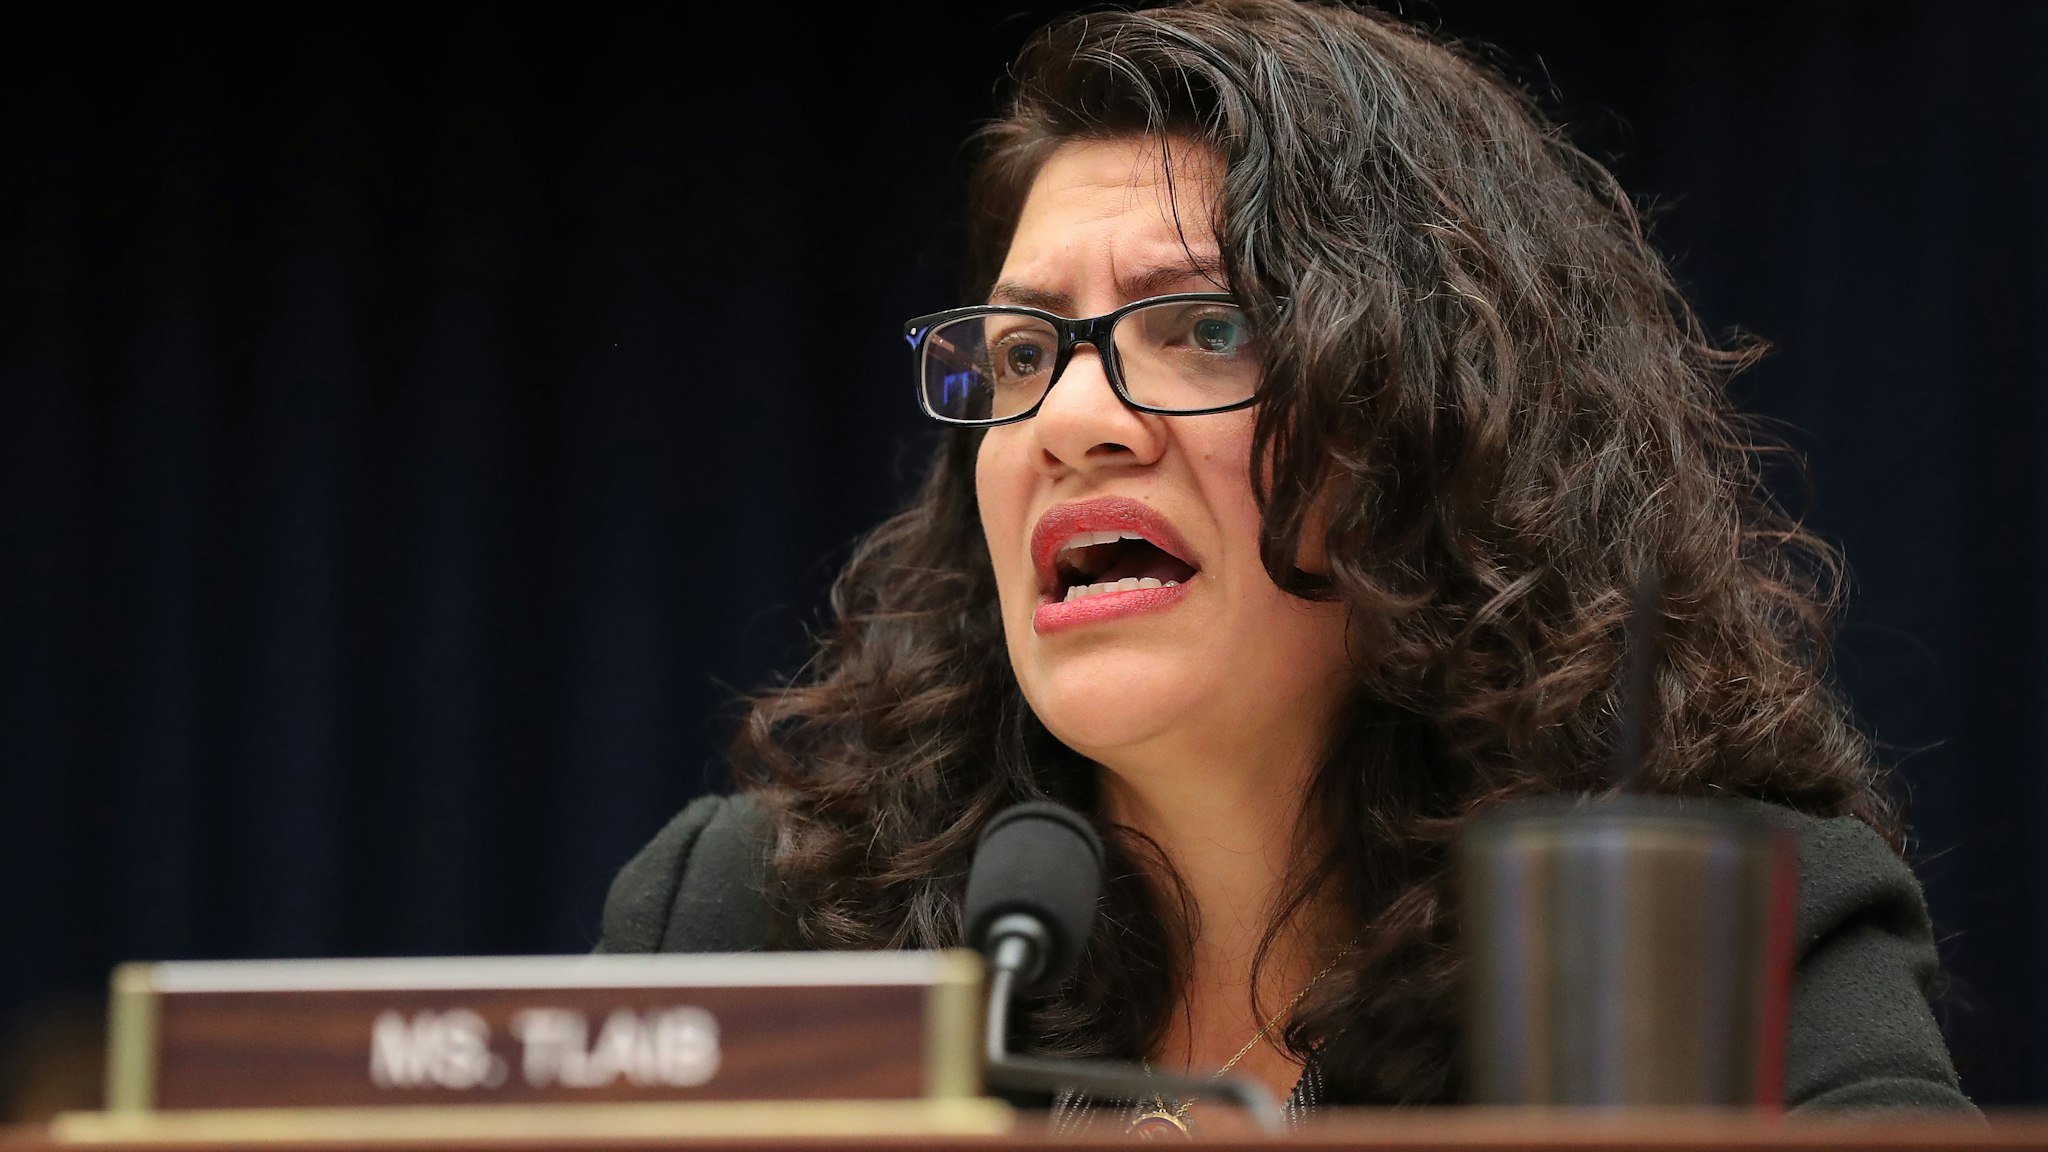 WASHINGTON, DC - OCTOBER 23: House Financial Services Committee member Rep. Rashida Tlaib (D-MI) questions Facebook co-founder and CEO Mark Zuckerberg during a hearing in the Rayburn House Office Building on Capitol Hill October 23, 2019 in Washington, DC. Zuckerberg testified about Facebook's proposed cryptocurrency Libra, how his company will handle false and misleading information by political leaders during the 2020 campaign and how it handles its users’ data and privacy. (Photo by Chip Somodevilla/Getty Images)